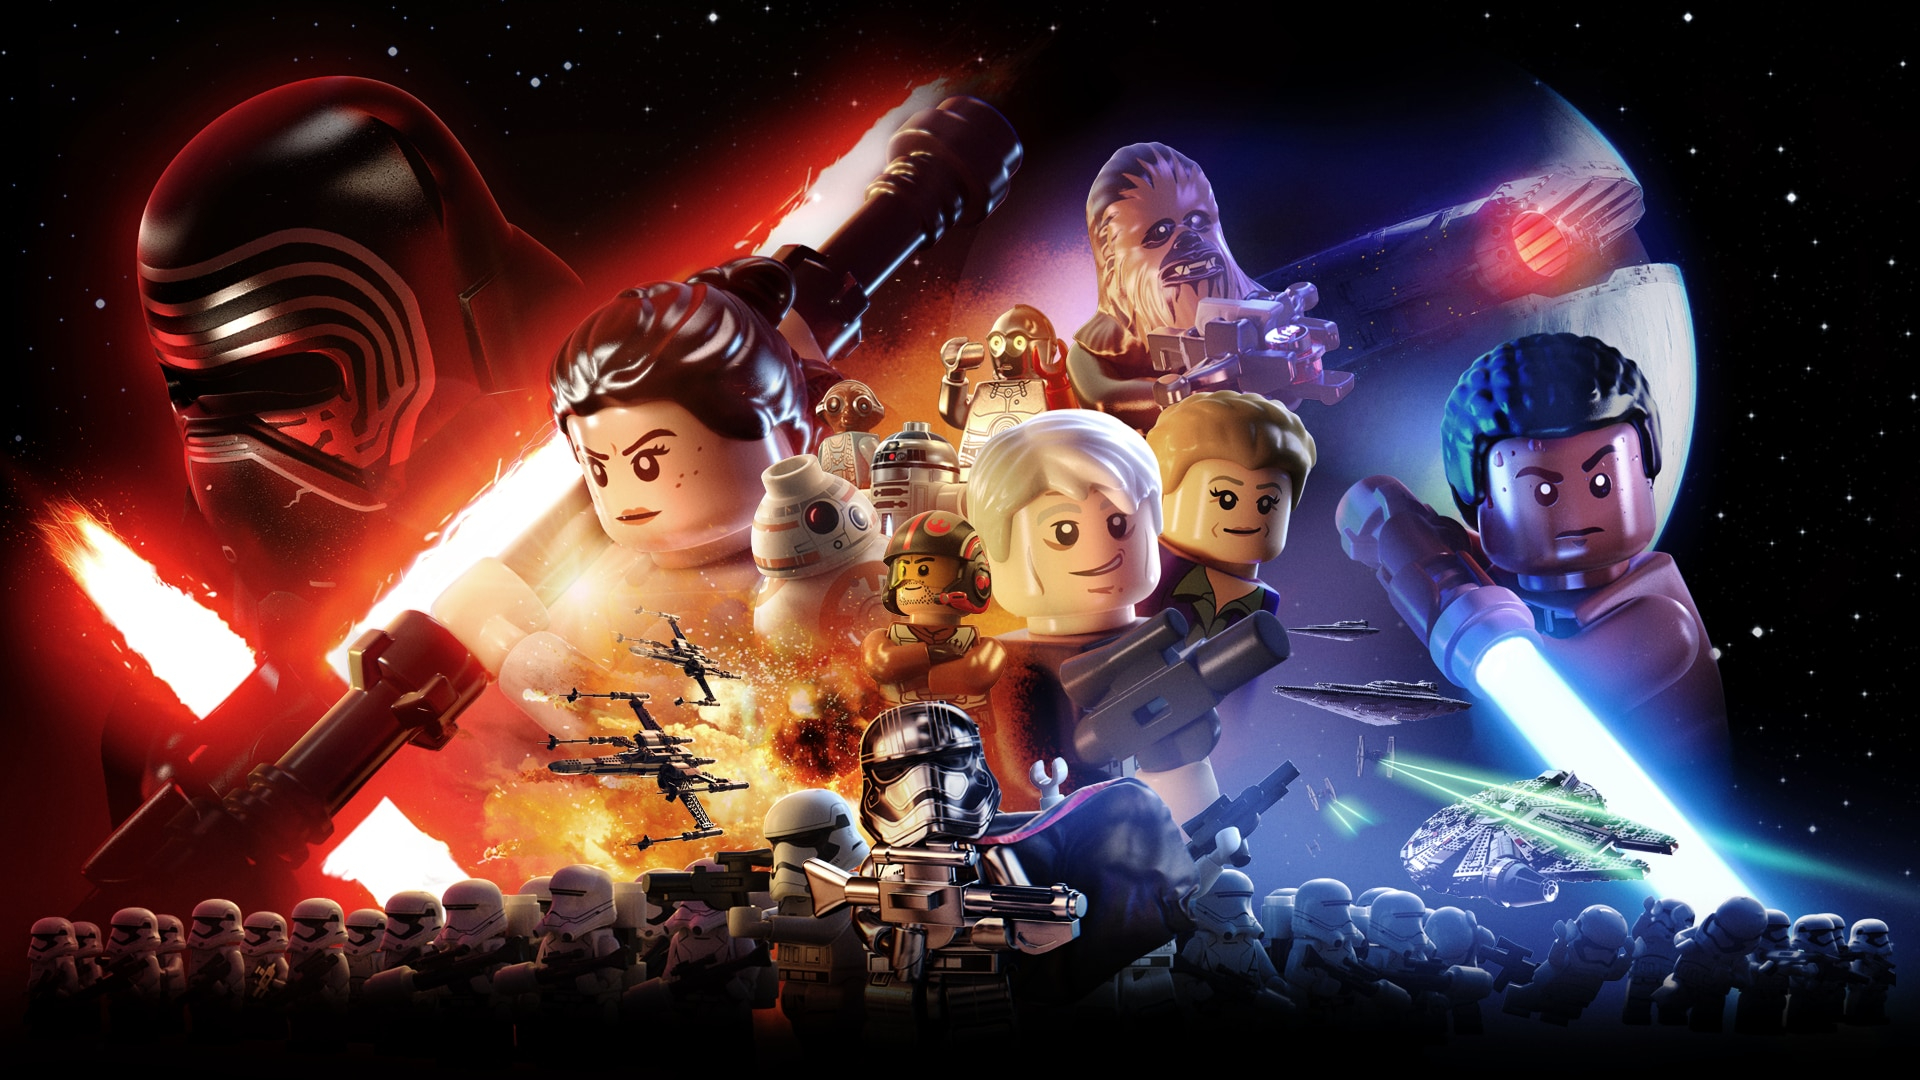 lego games for pc lego star wars games for computer free no download